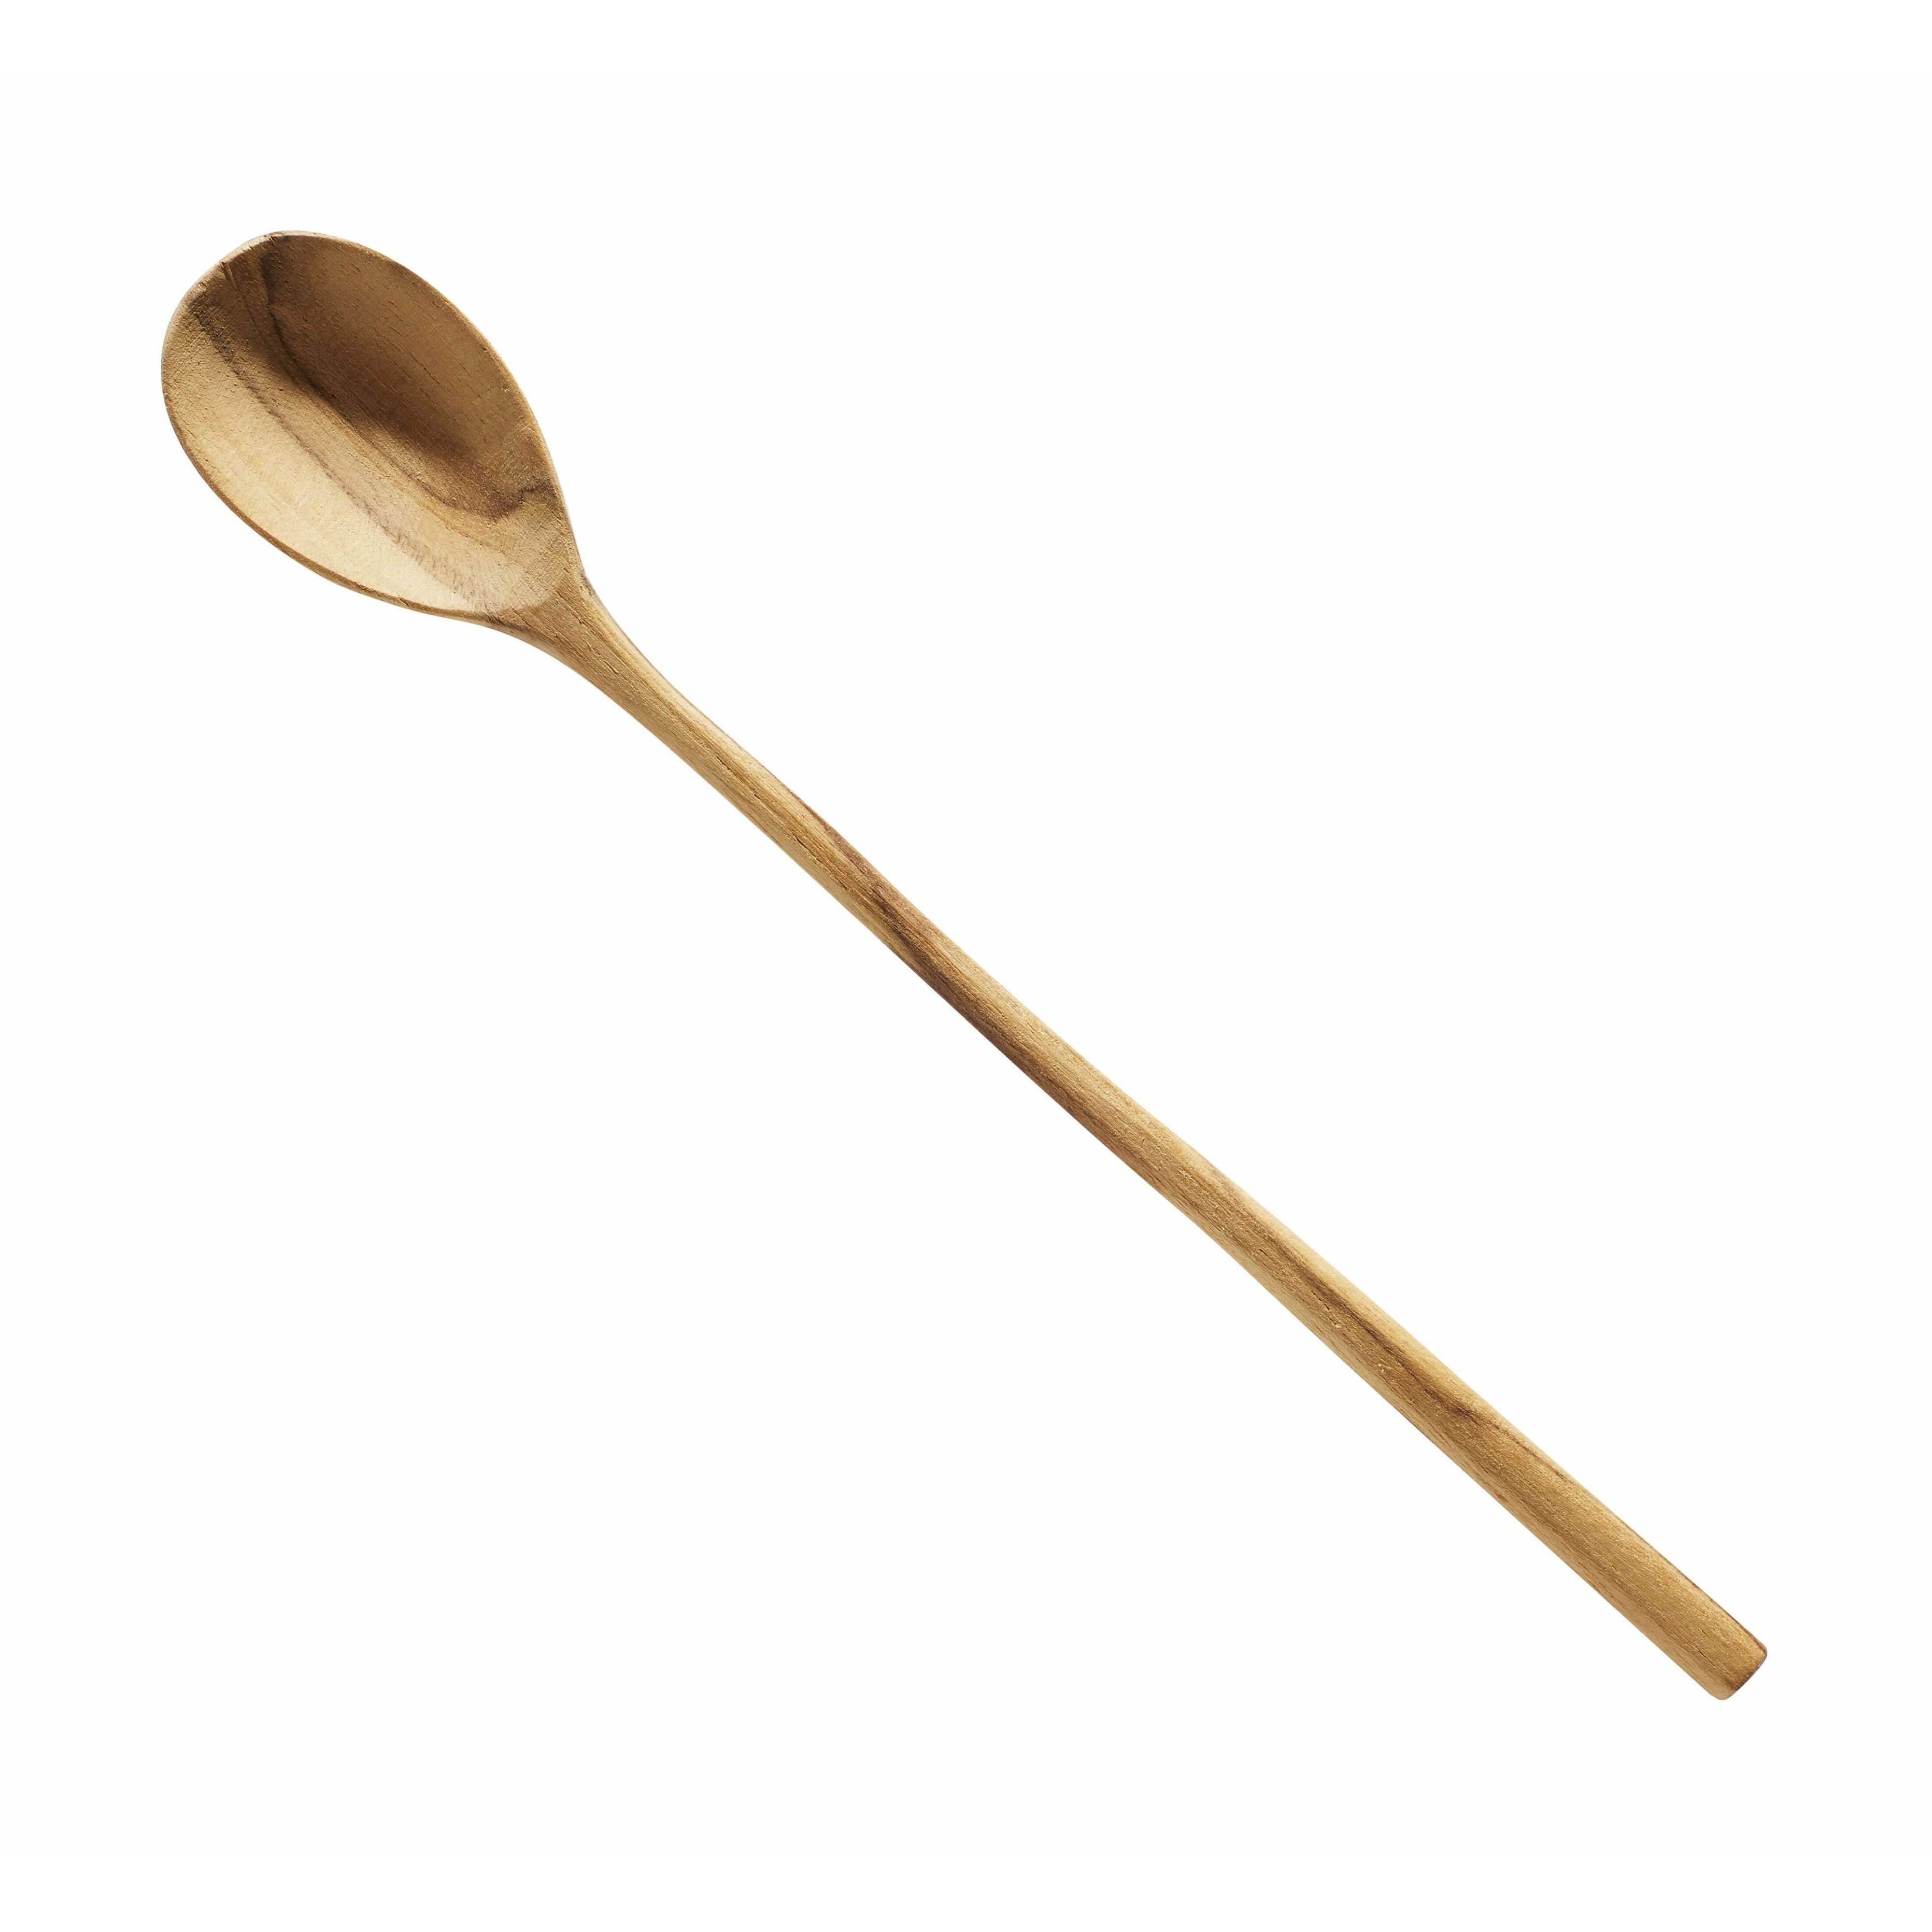 Muubs Cafe Latte Spoon, 20 cm